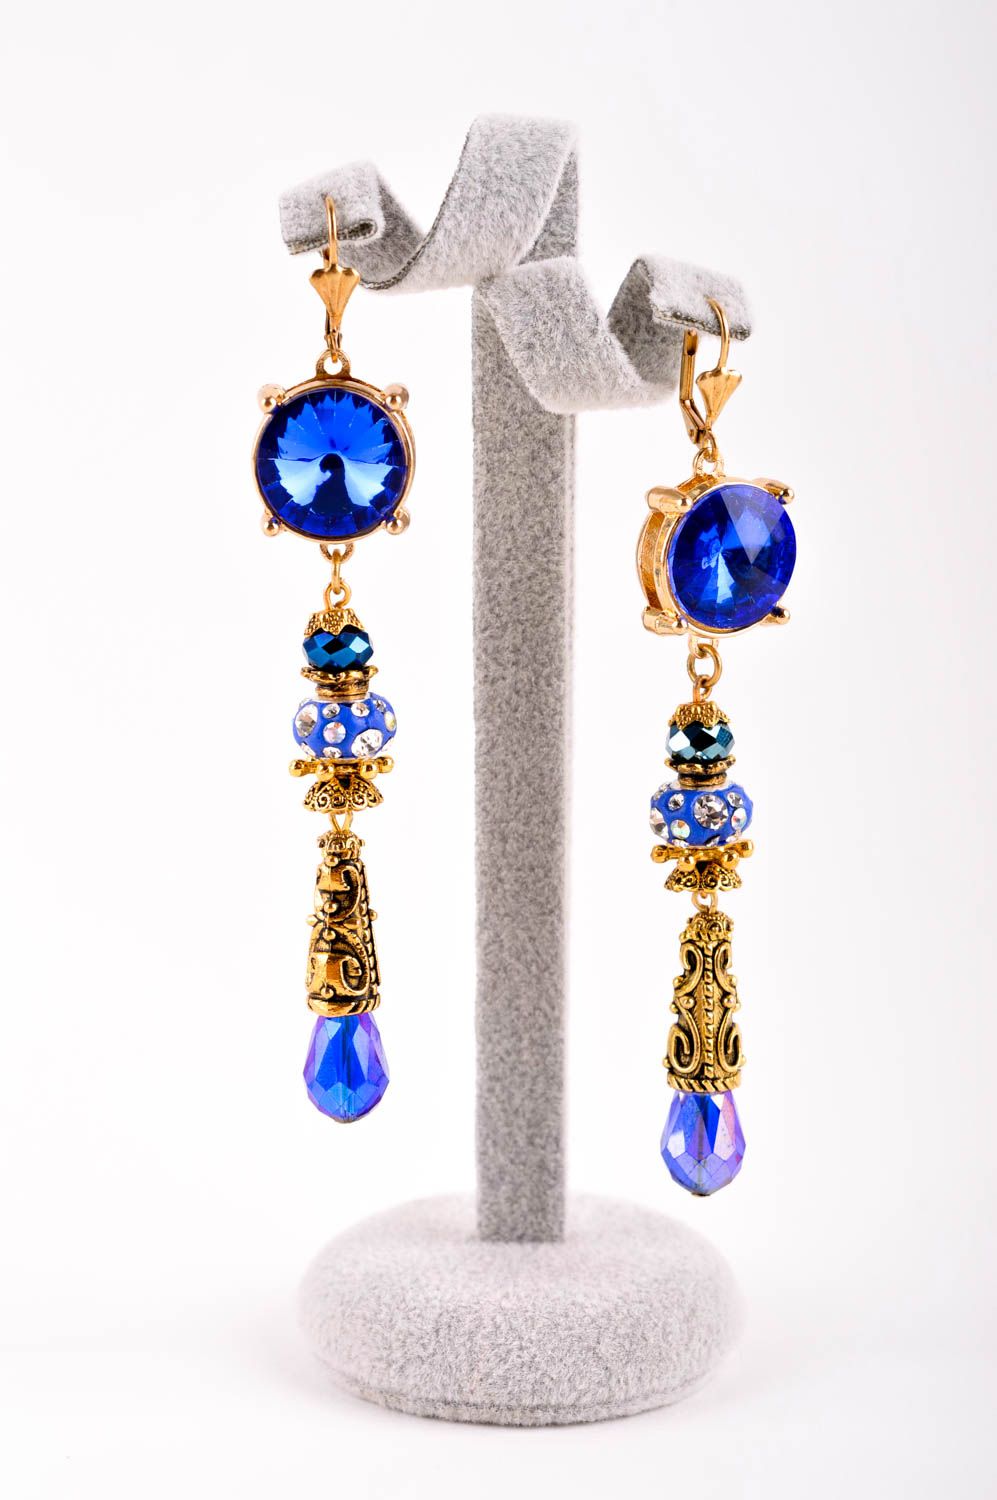 Handmade earrings designer accessory with stones unusual gift for women photo 2